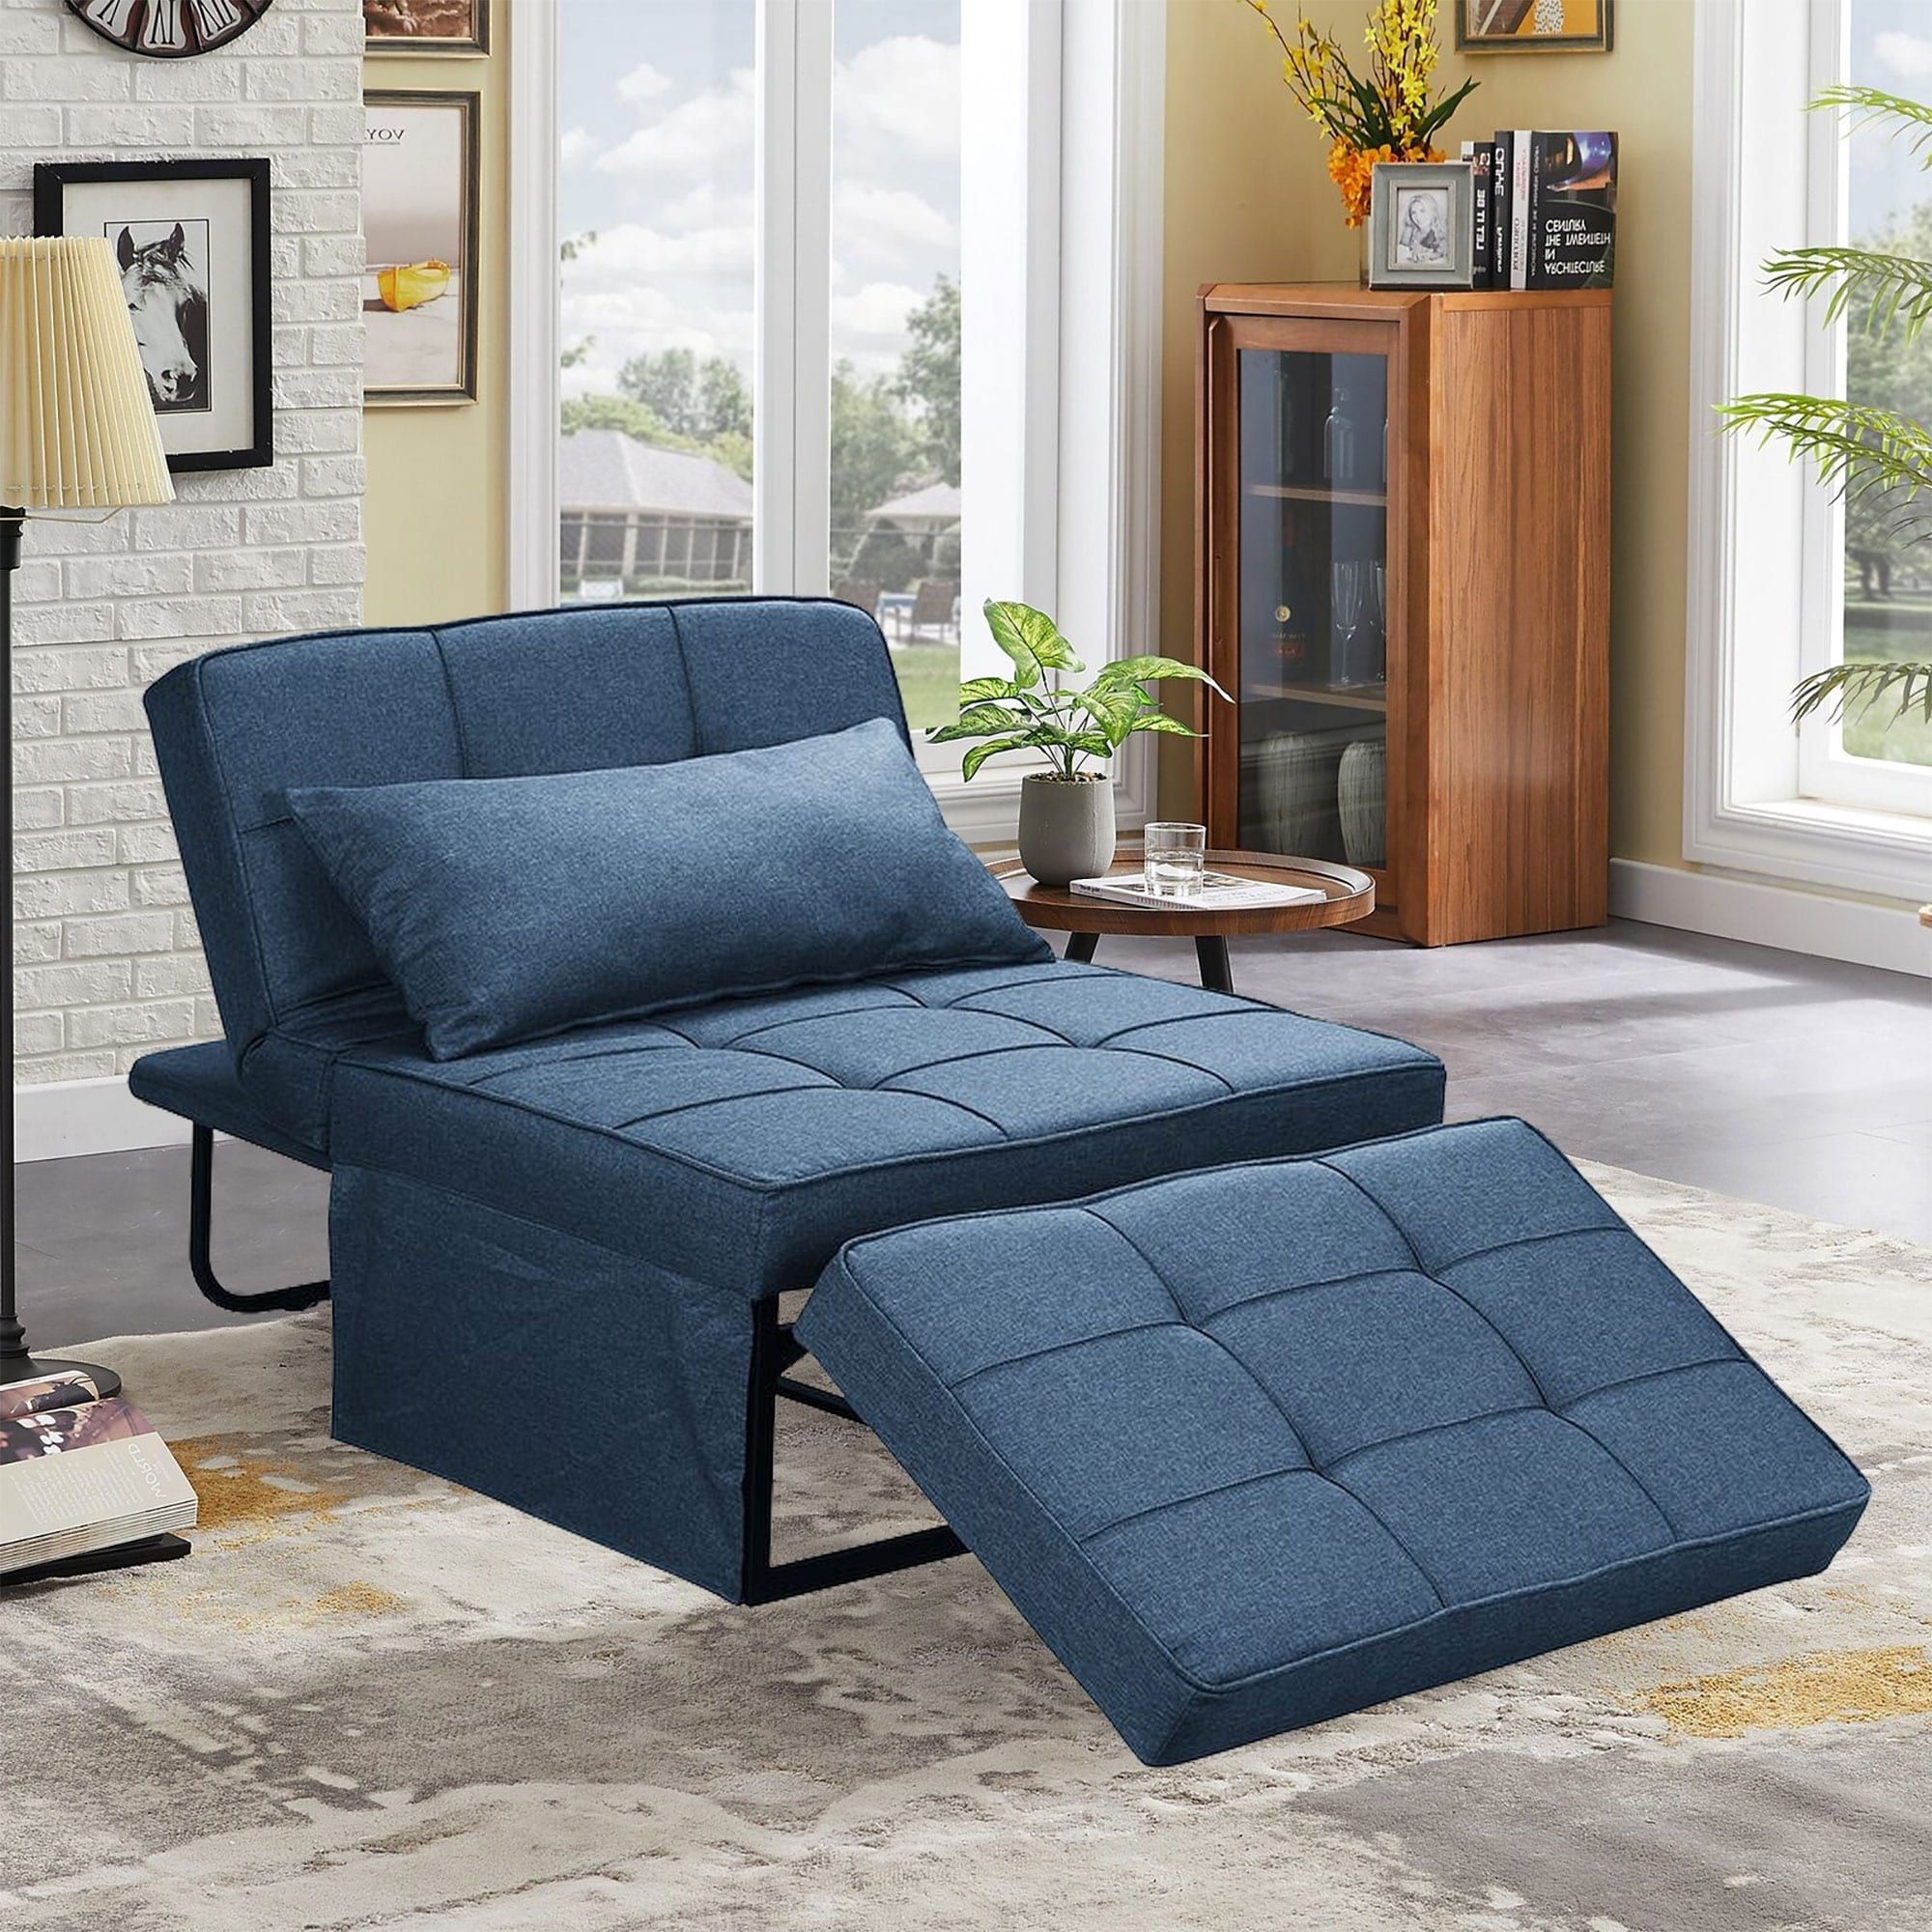 Convertible Sofa Bed Sleeper Sofa Chair Couch Folding Ottoman Back  Adjustable – On Sale – Overstock – 35665771 Pertaining To Well Liked Blue Folding Bed Ottomans (View 14 of 15)